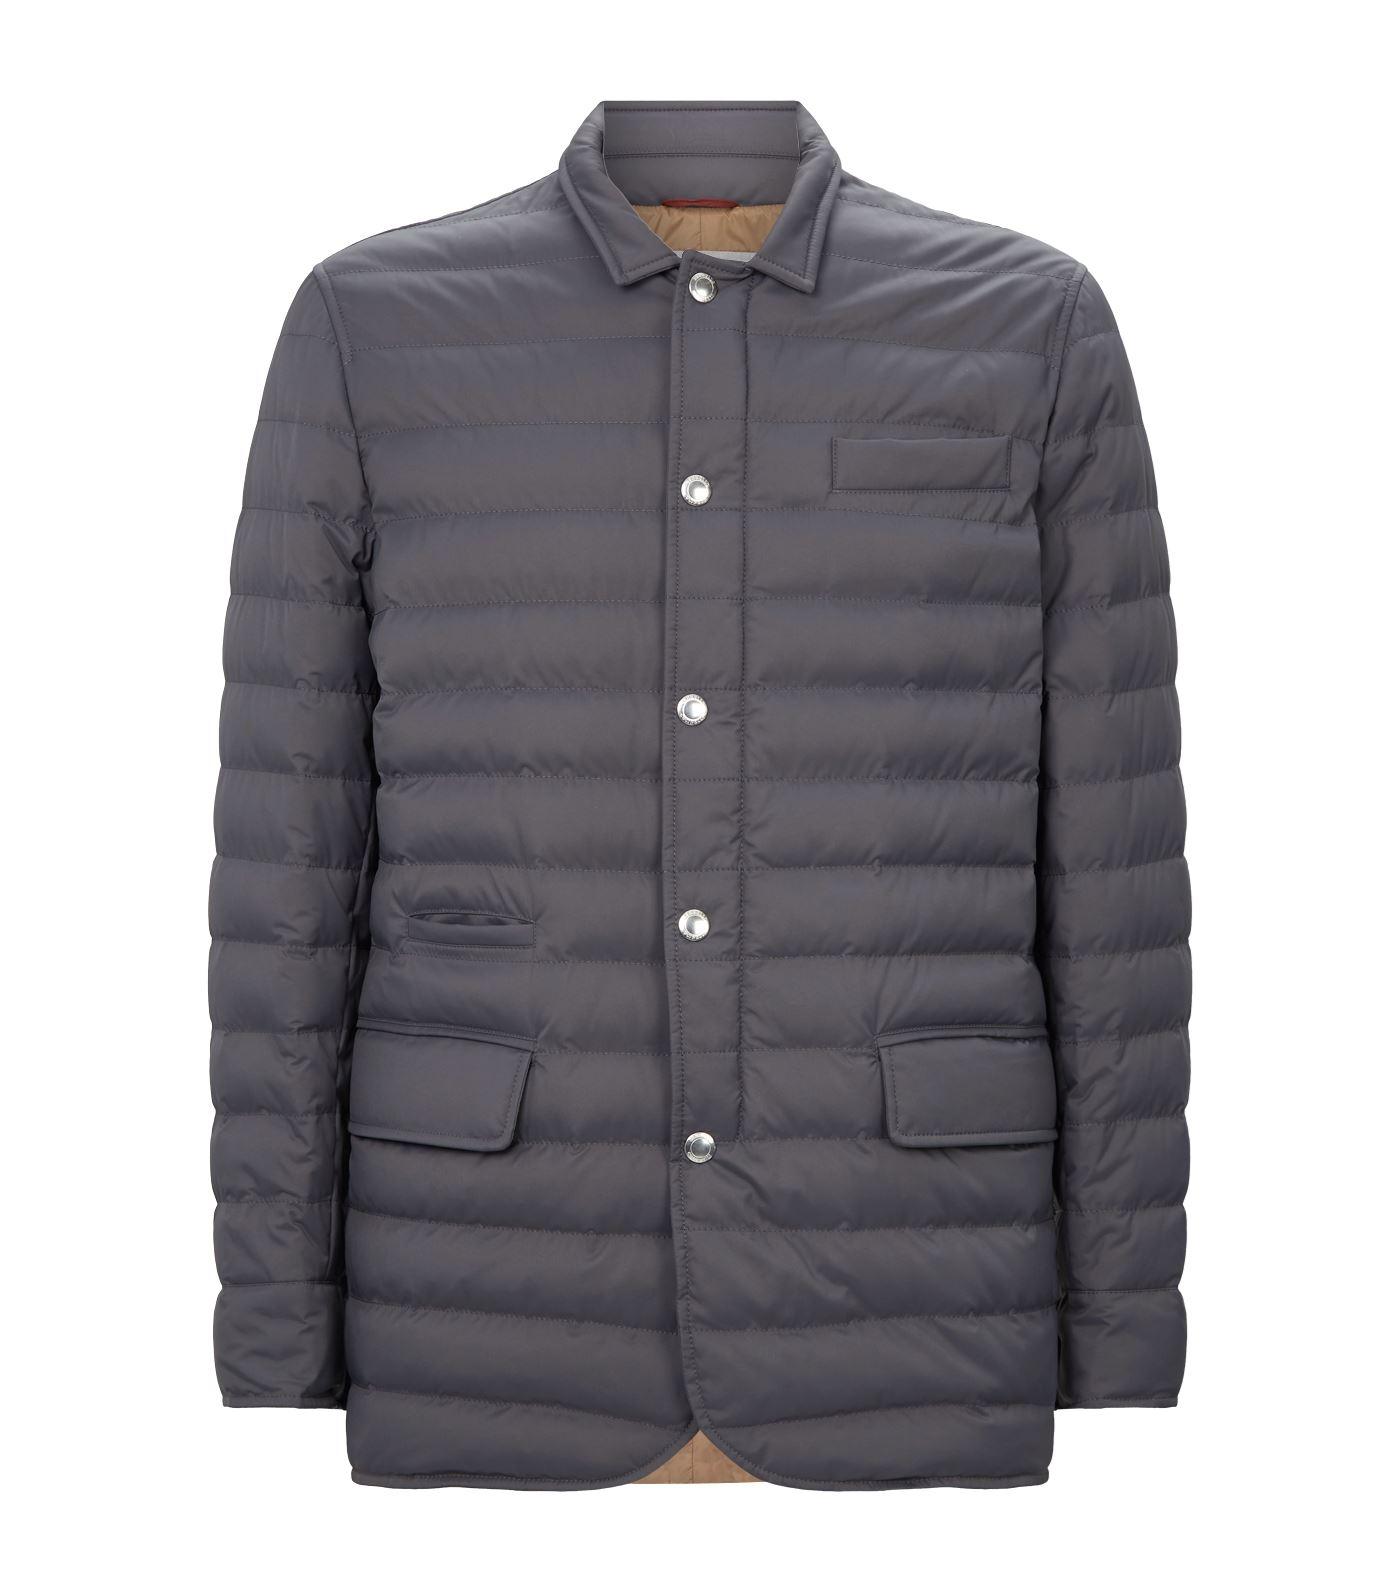 Brunello Cucinelli Goose Padded Down Jacket in Grey (Gray) for Men - Lyst